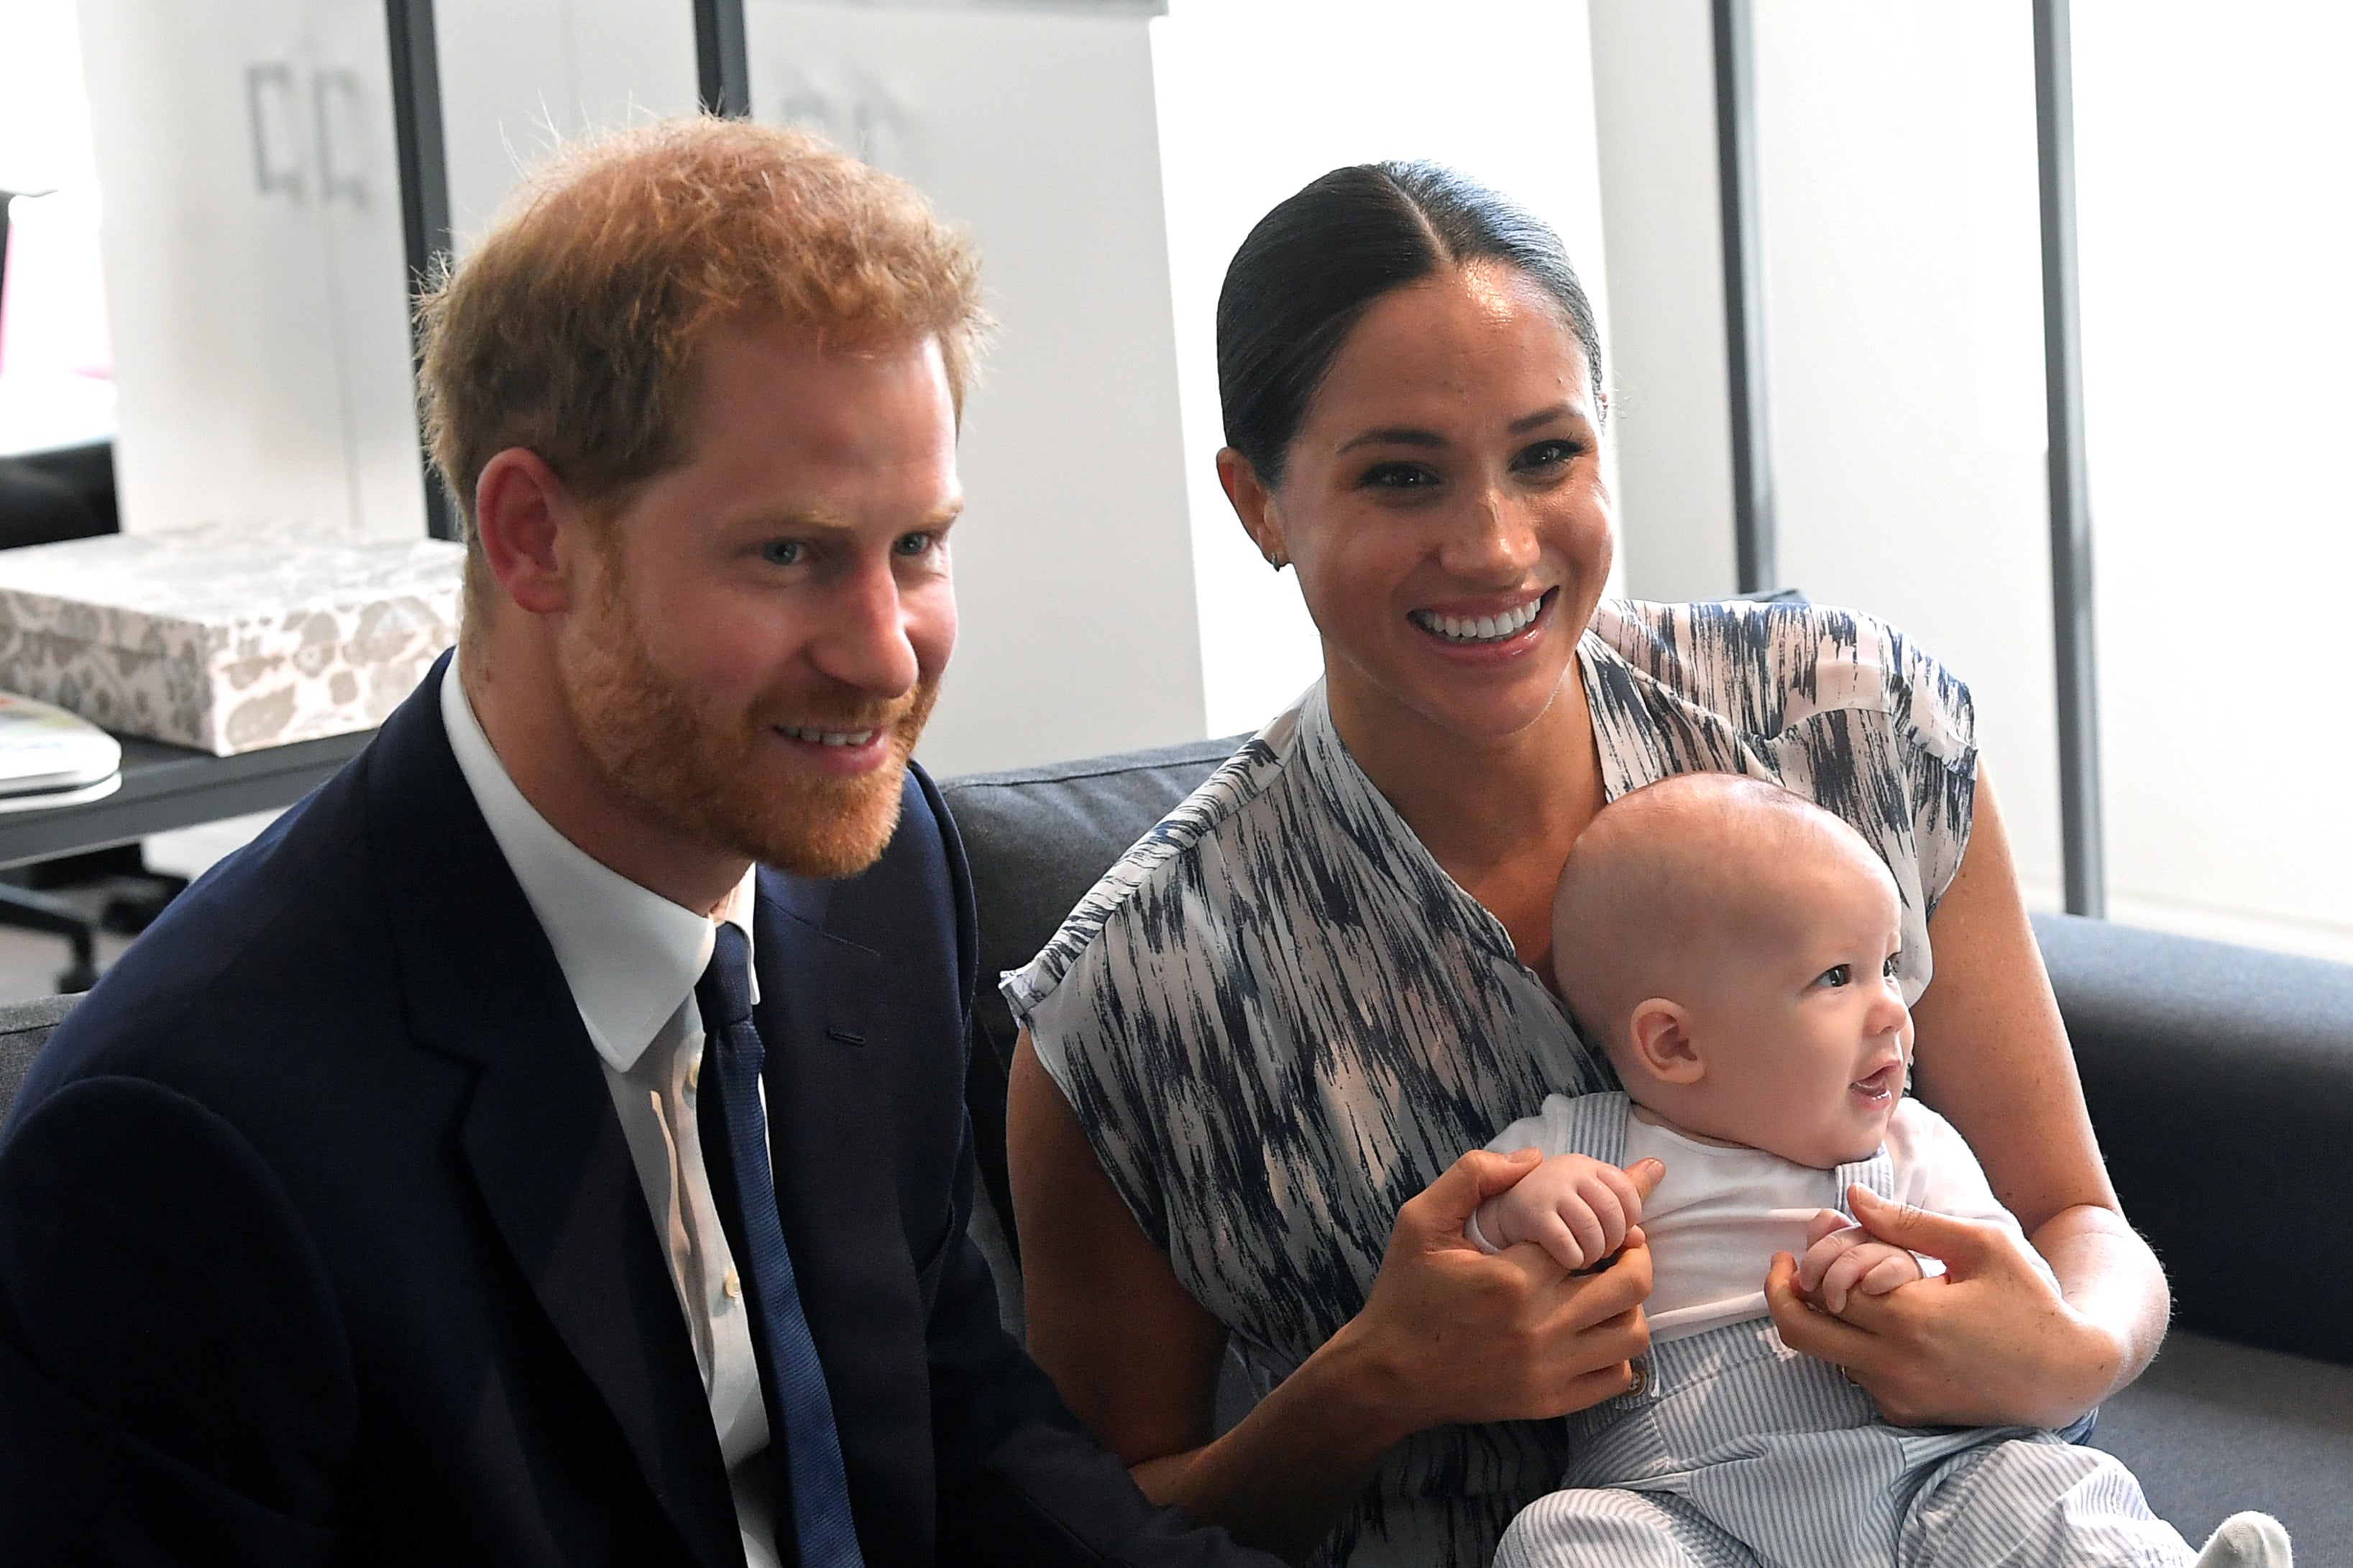 Harry, Meghan and Archie – whose name inspired the Archewell Foundation